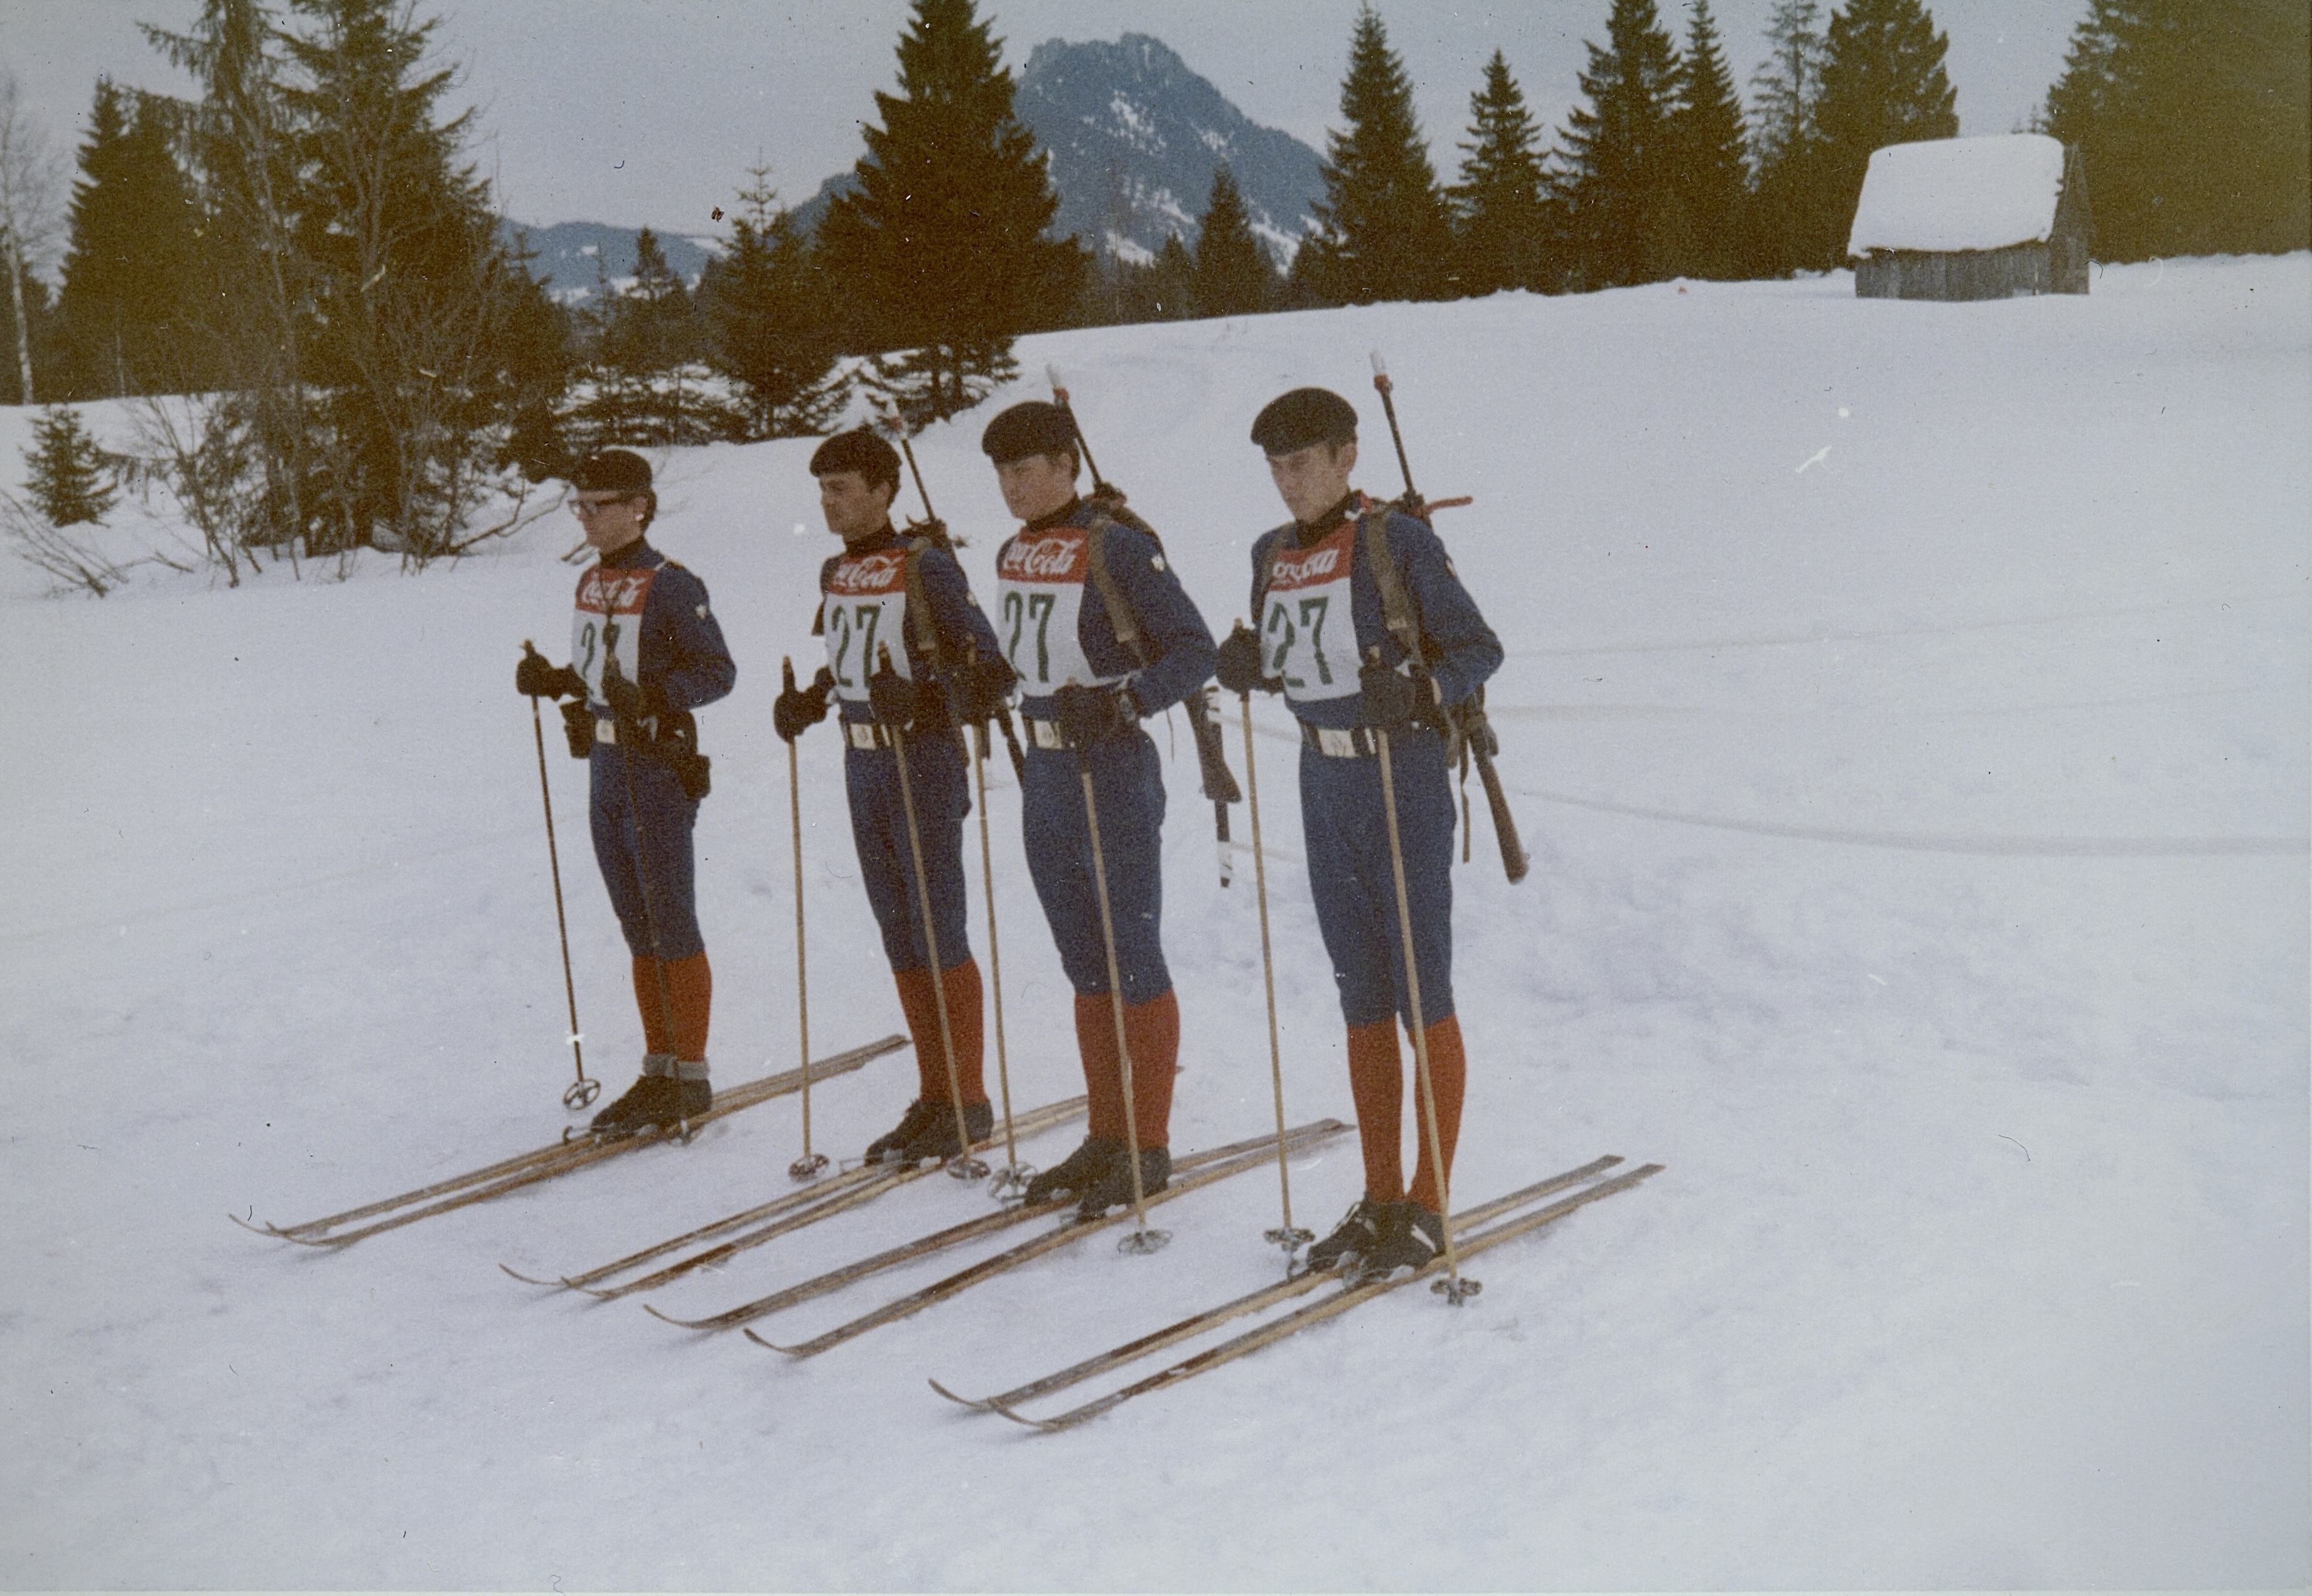 Four men stood in a line skiing at the Army Championships for cross-country skiing